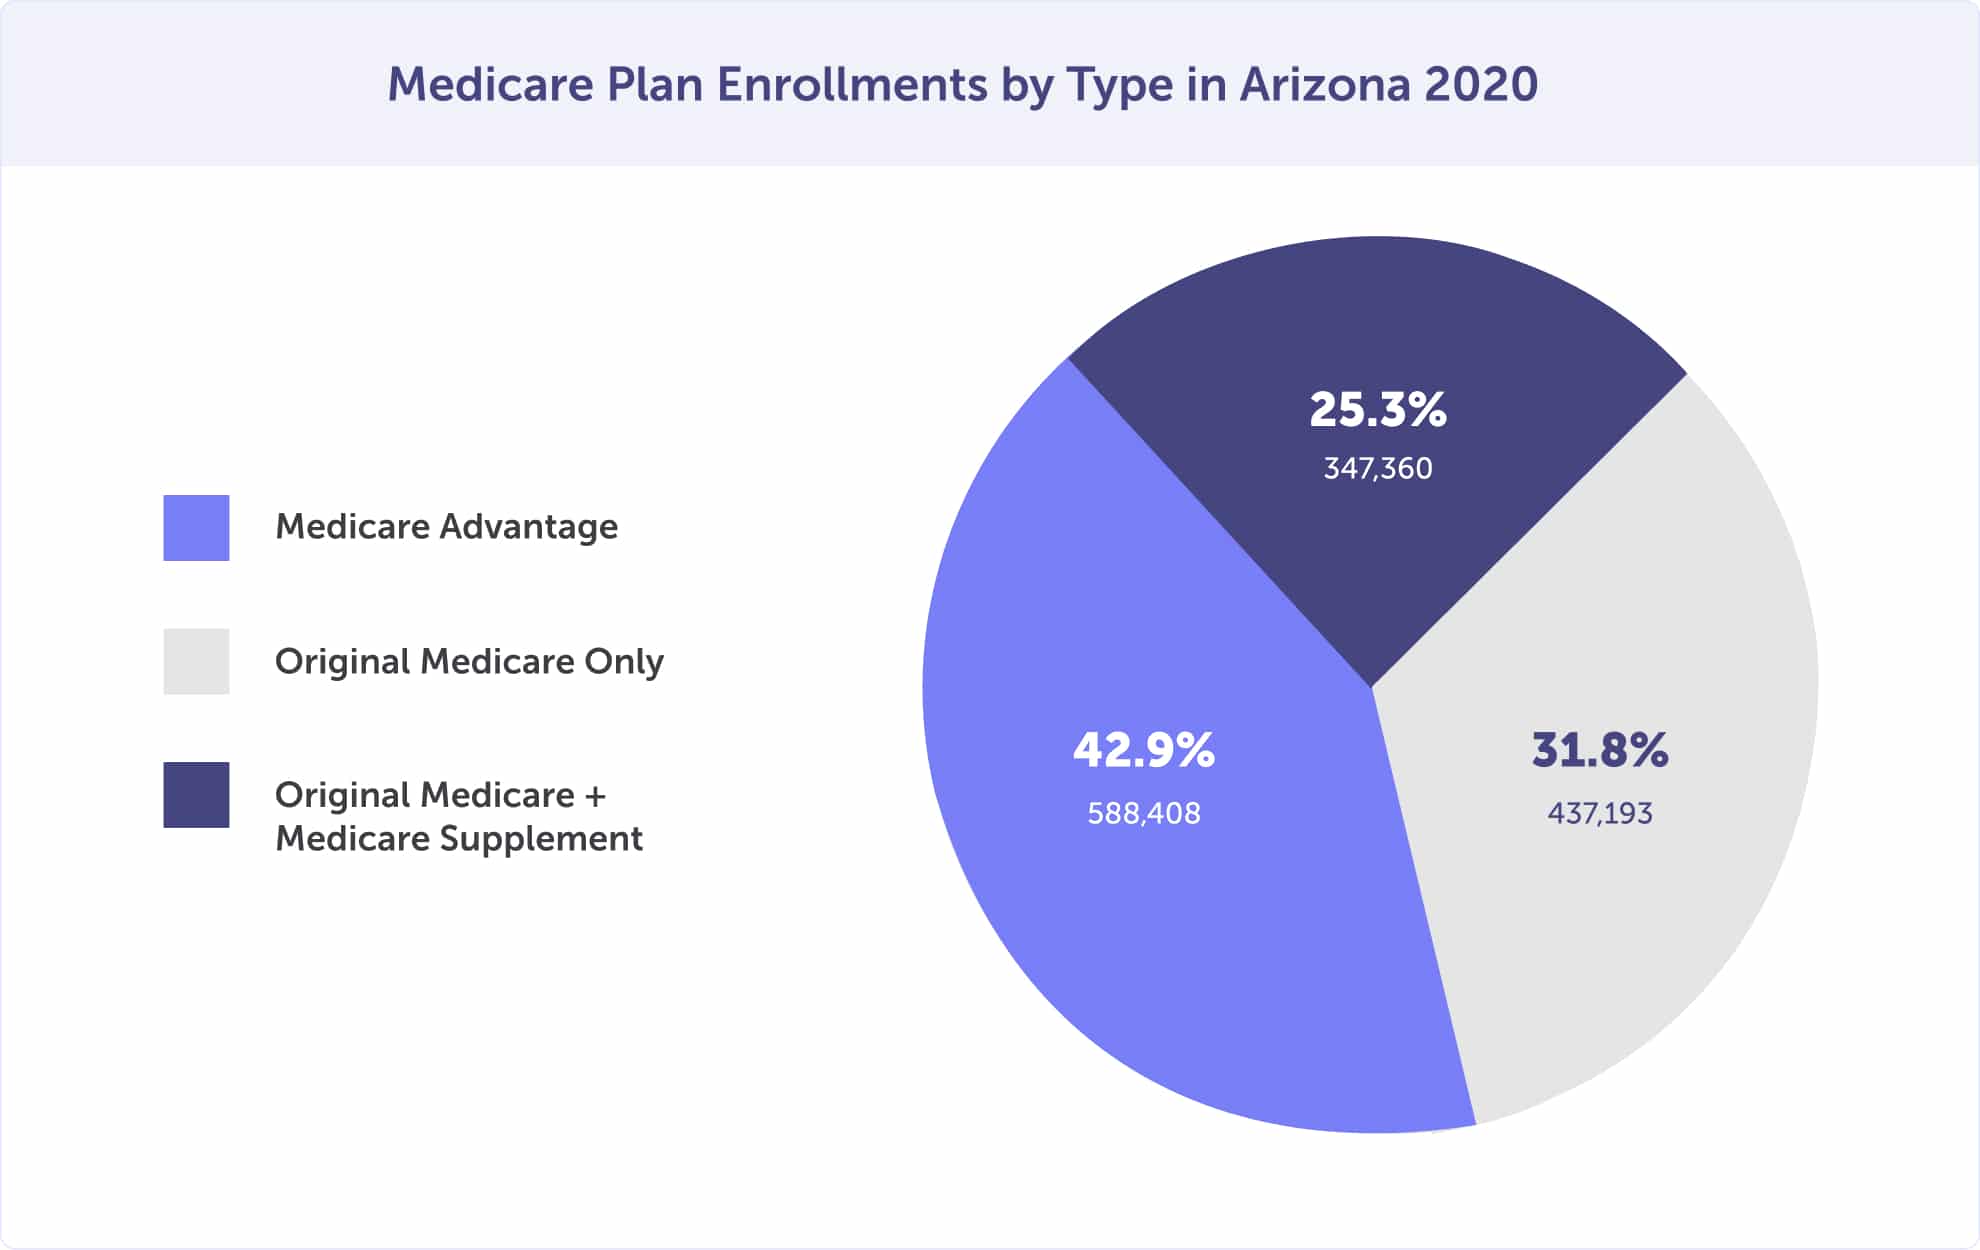 Medicare plan enrollments by type in Arizona 2020